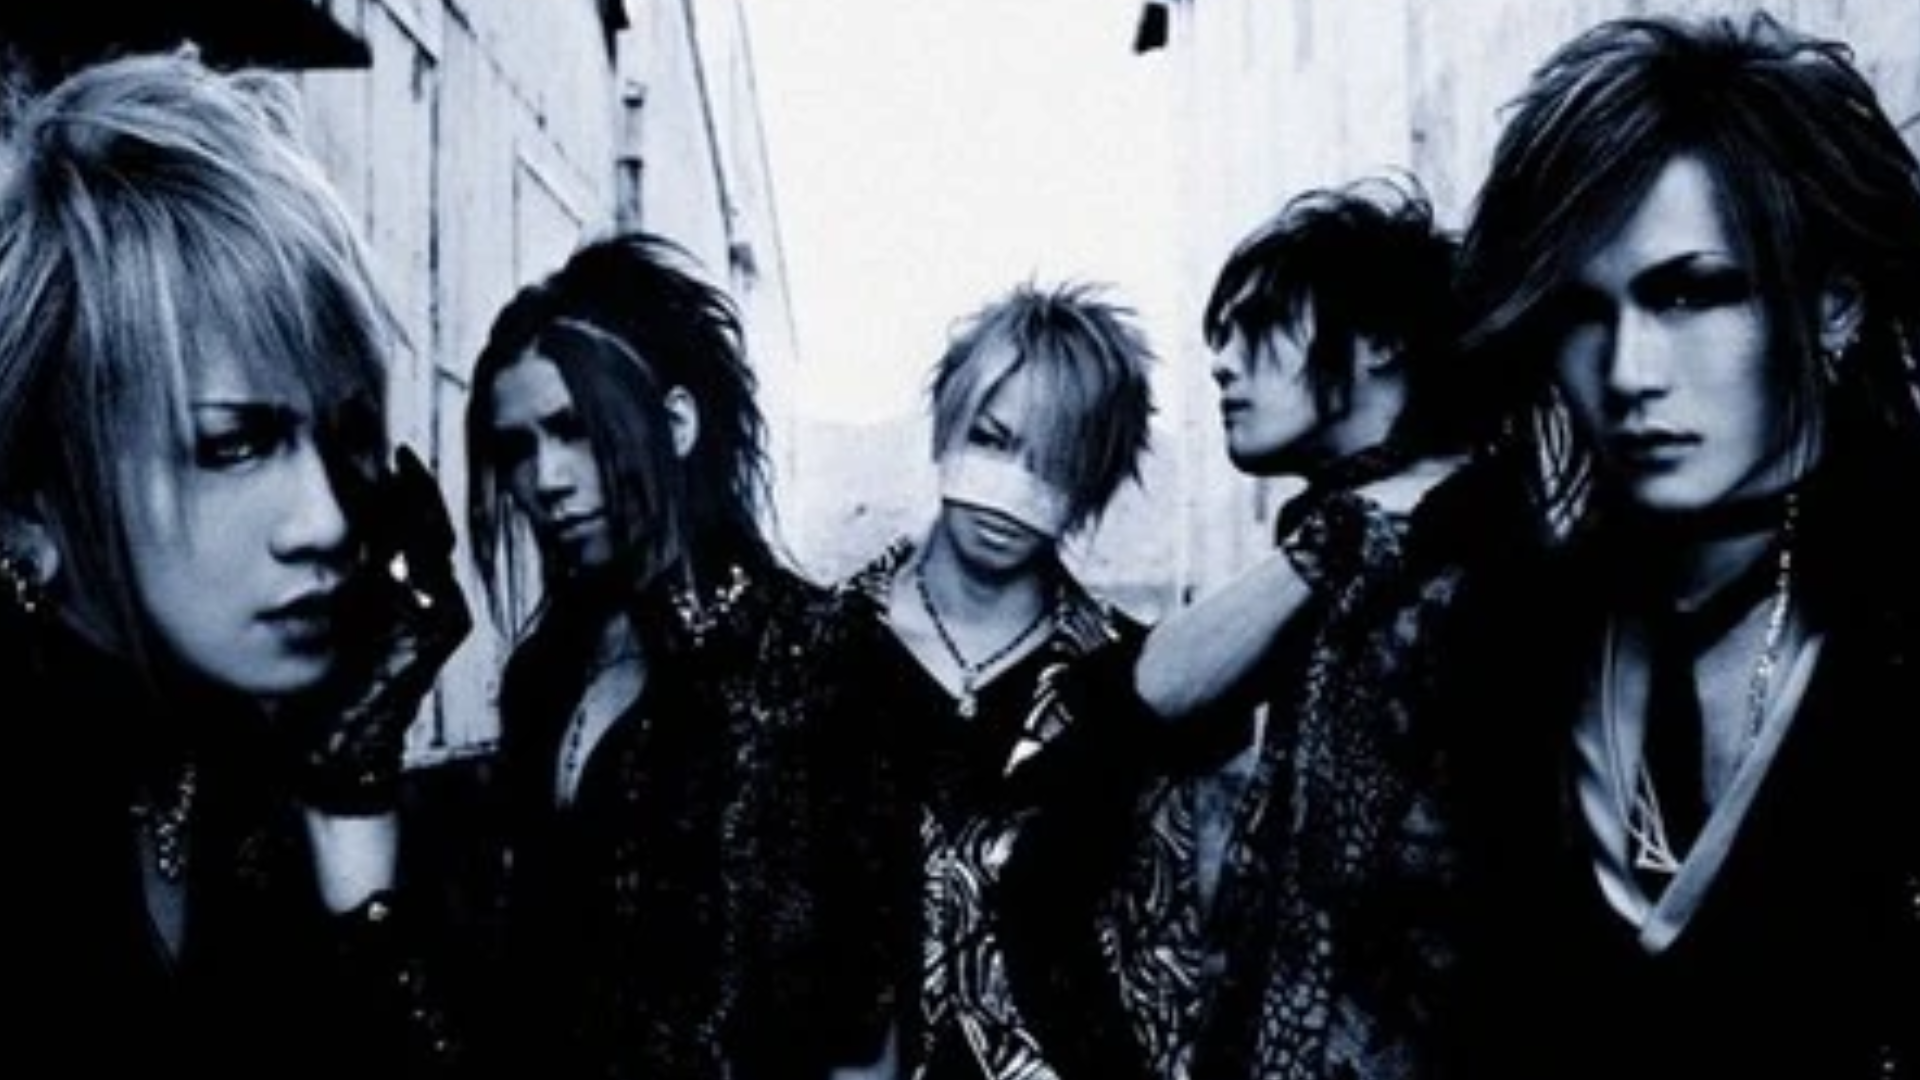 <p>In 2002, The Gazette was formed by Reita, Uruha, and Ruki. Fool’s Mate reports that the band was formed when the trio grew tired of playing for others and decided to form a band themselves.</p> <p>Image: PS Company</p>